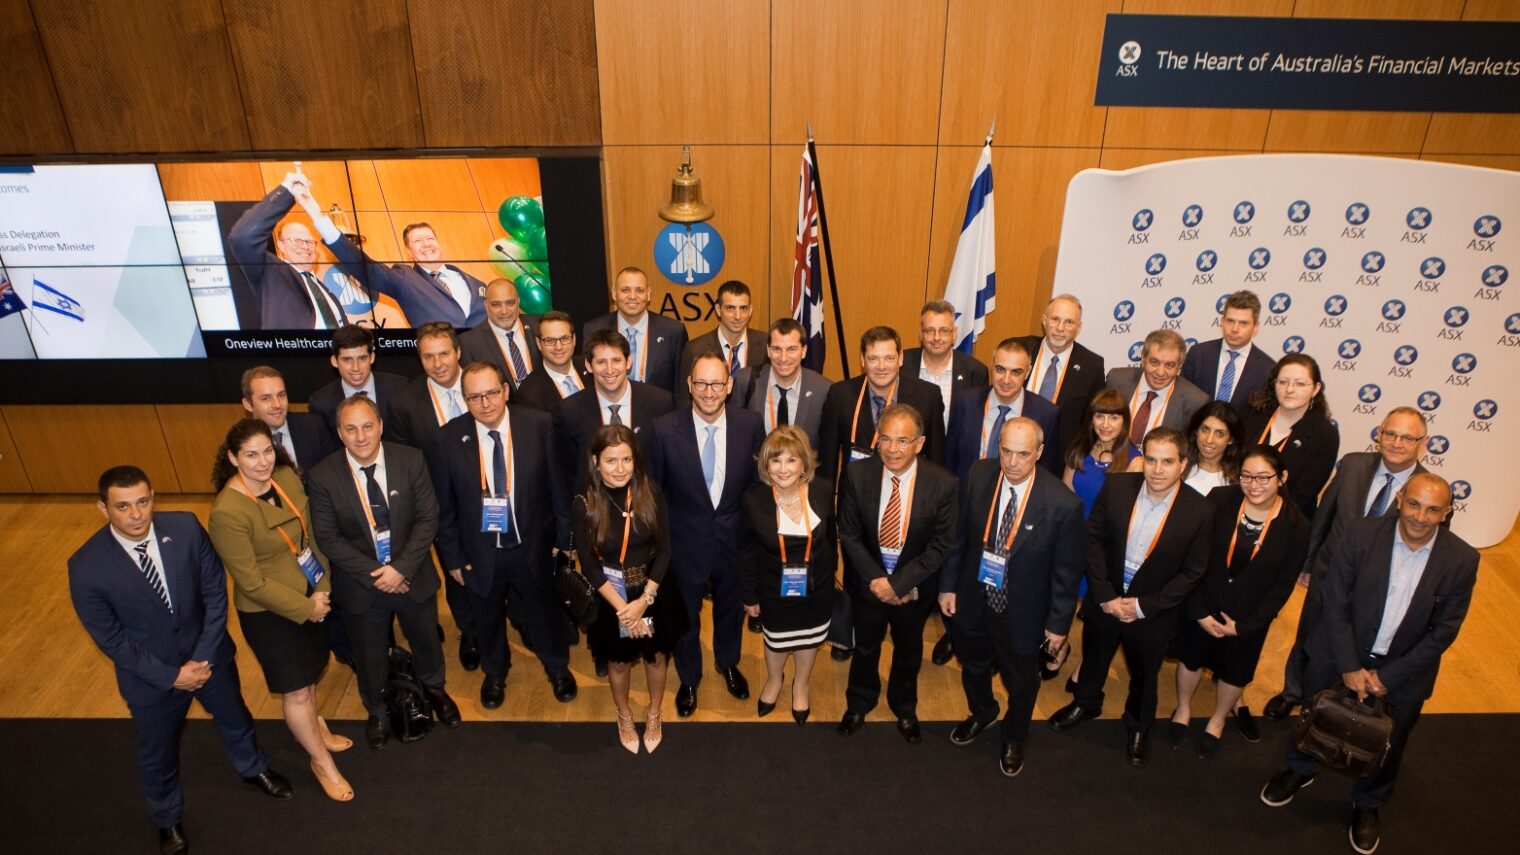 Prime Minister Netanyahu’s delegation visiting ASX in February 2017. Photo by Al Seib/courtesy of ASX